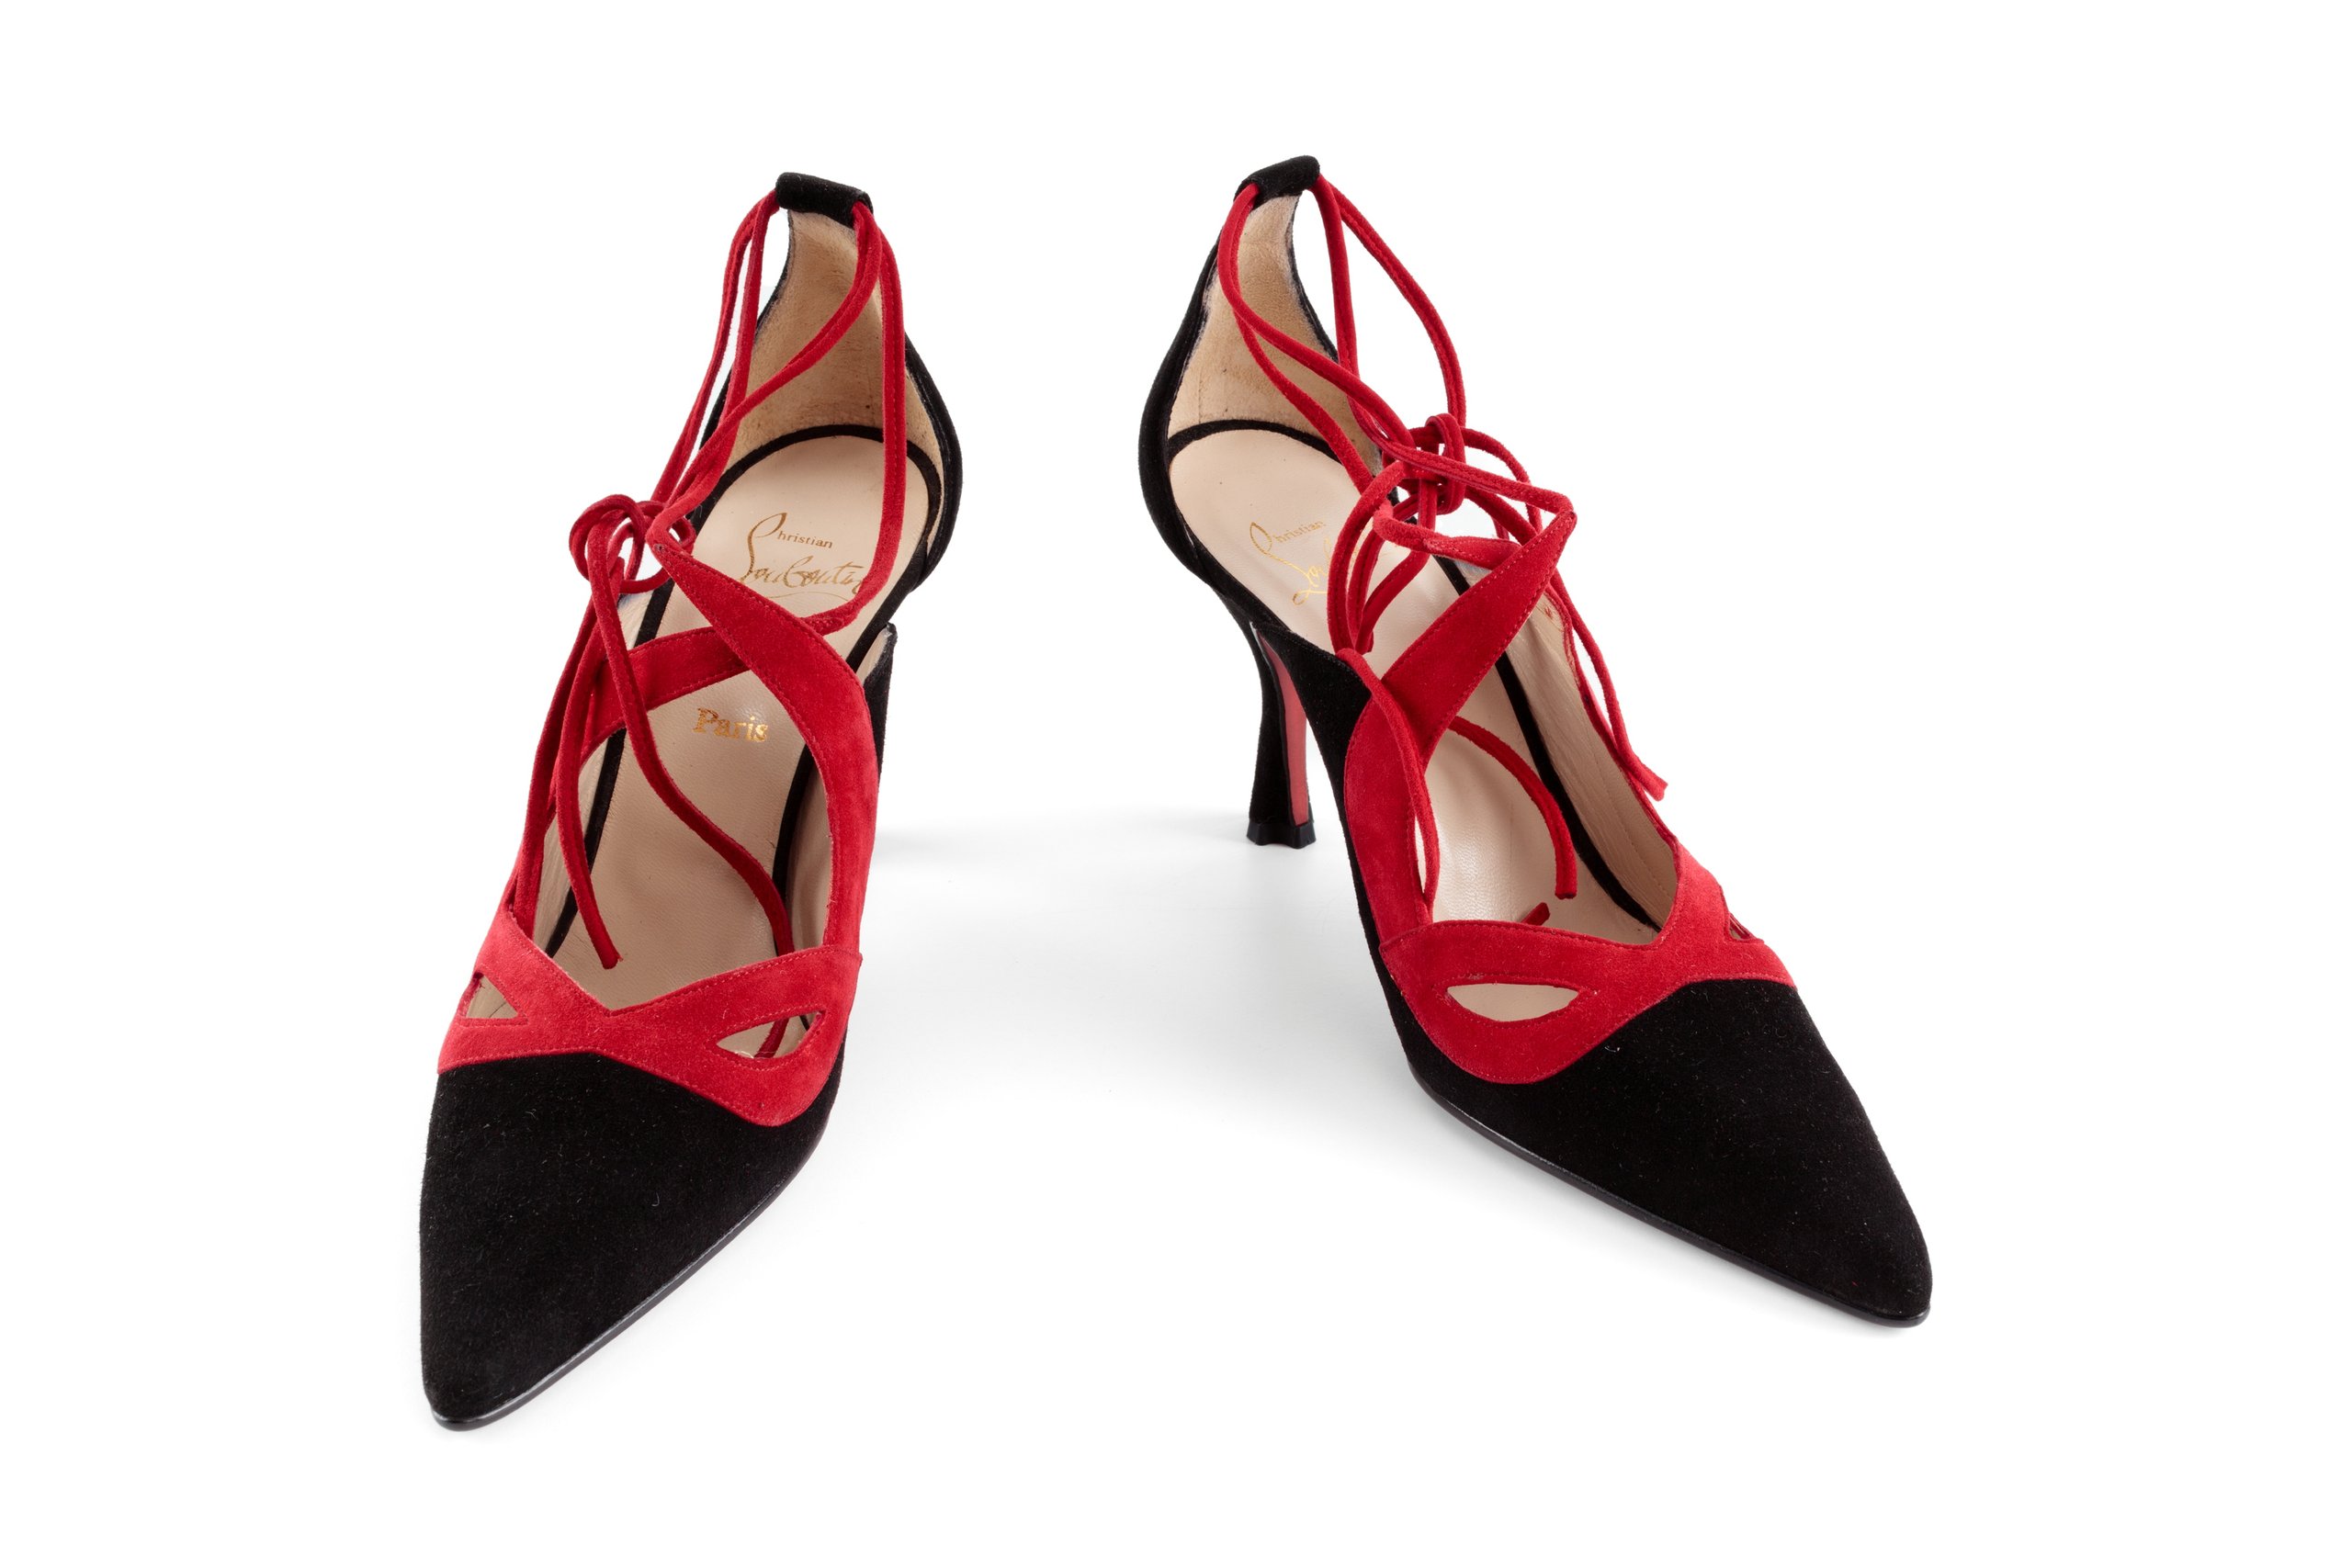 Pair of womens 'Maskovitch' shoes by Christian Louboutin